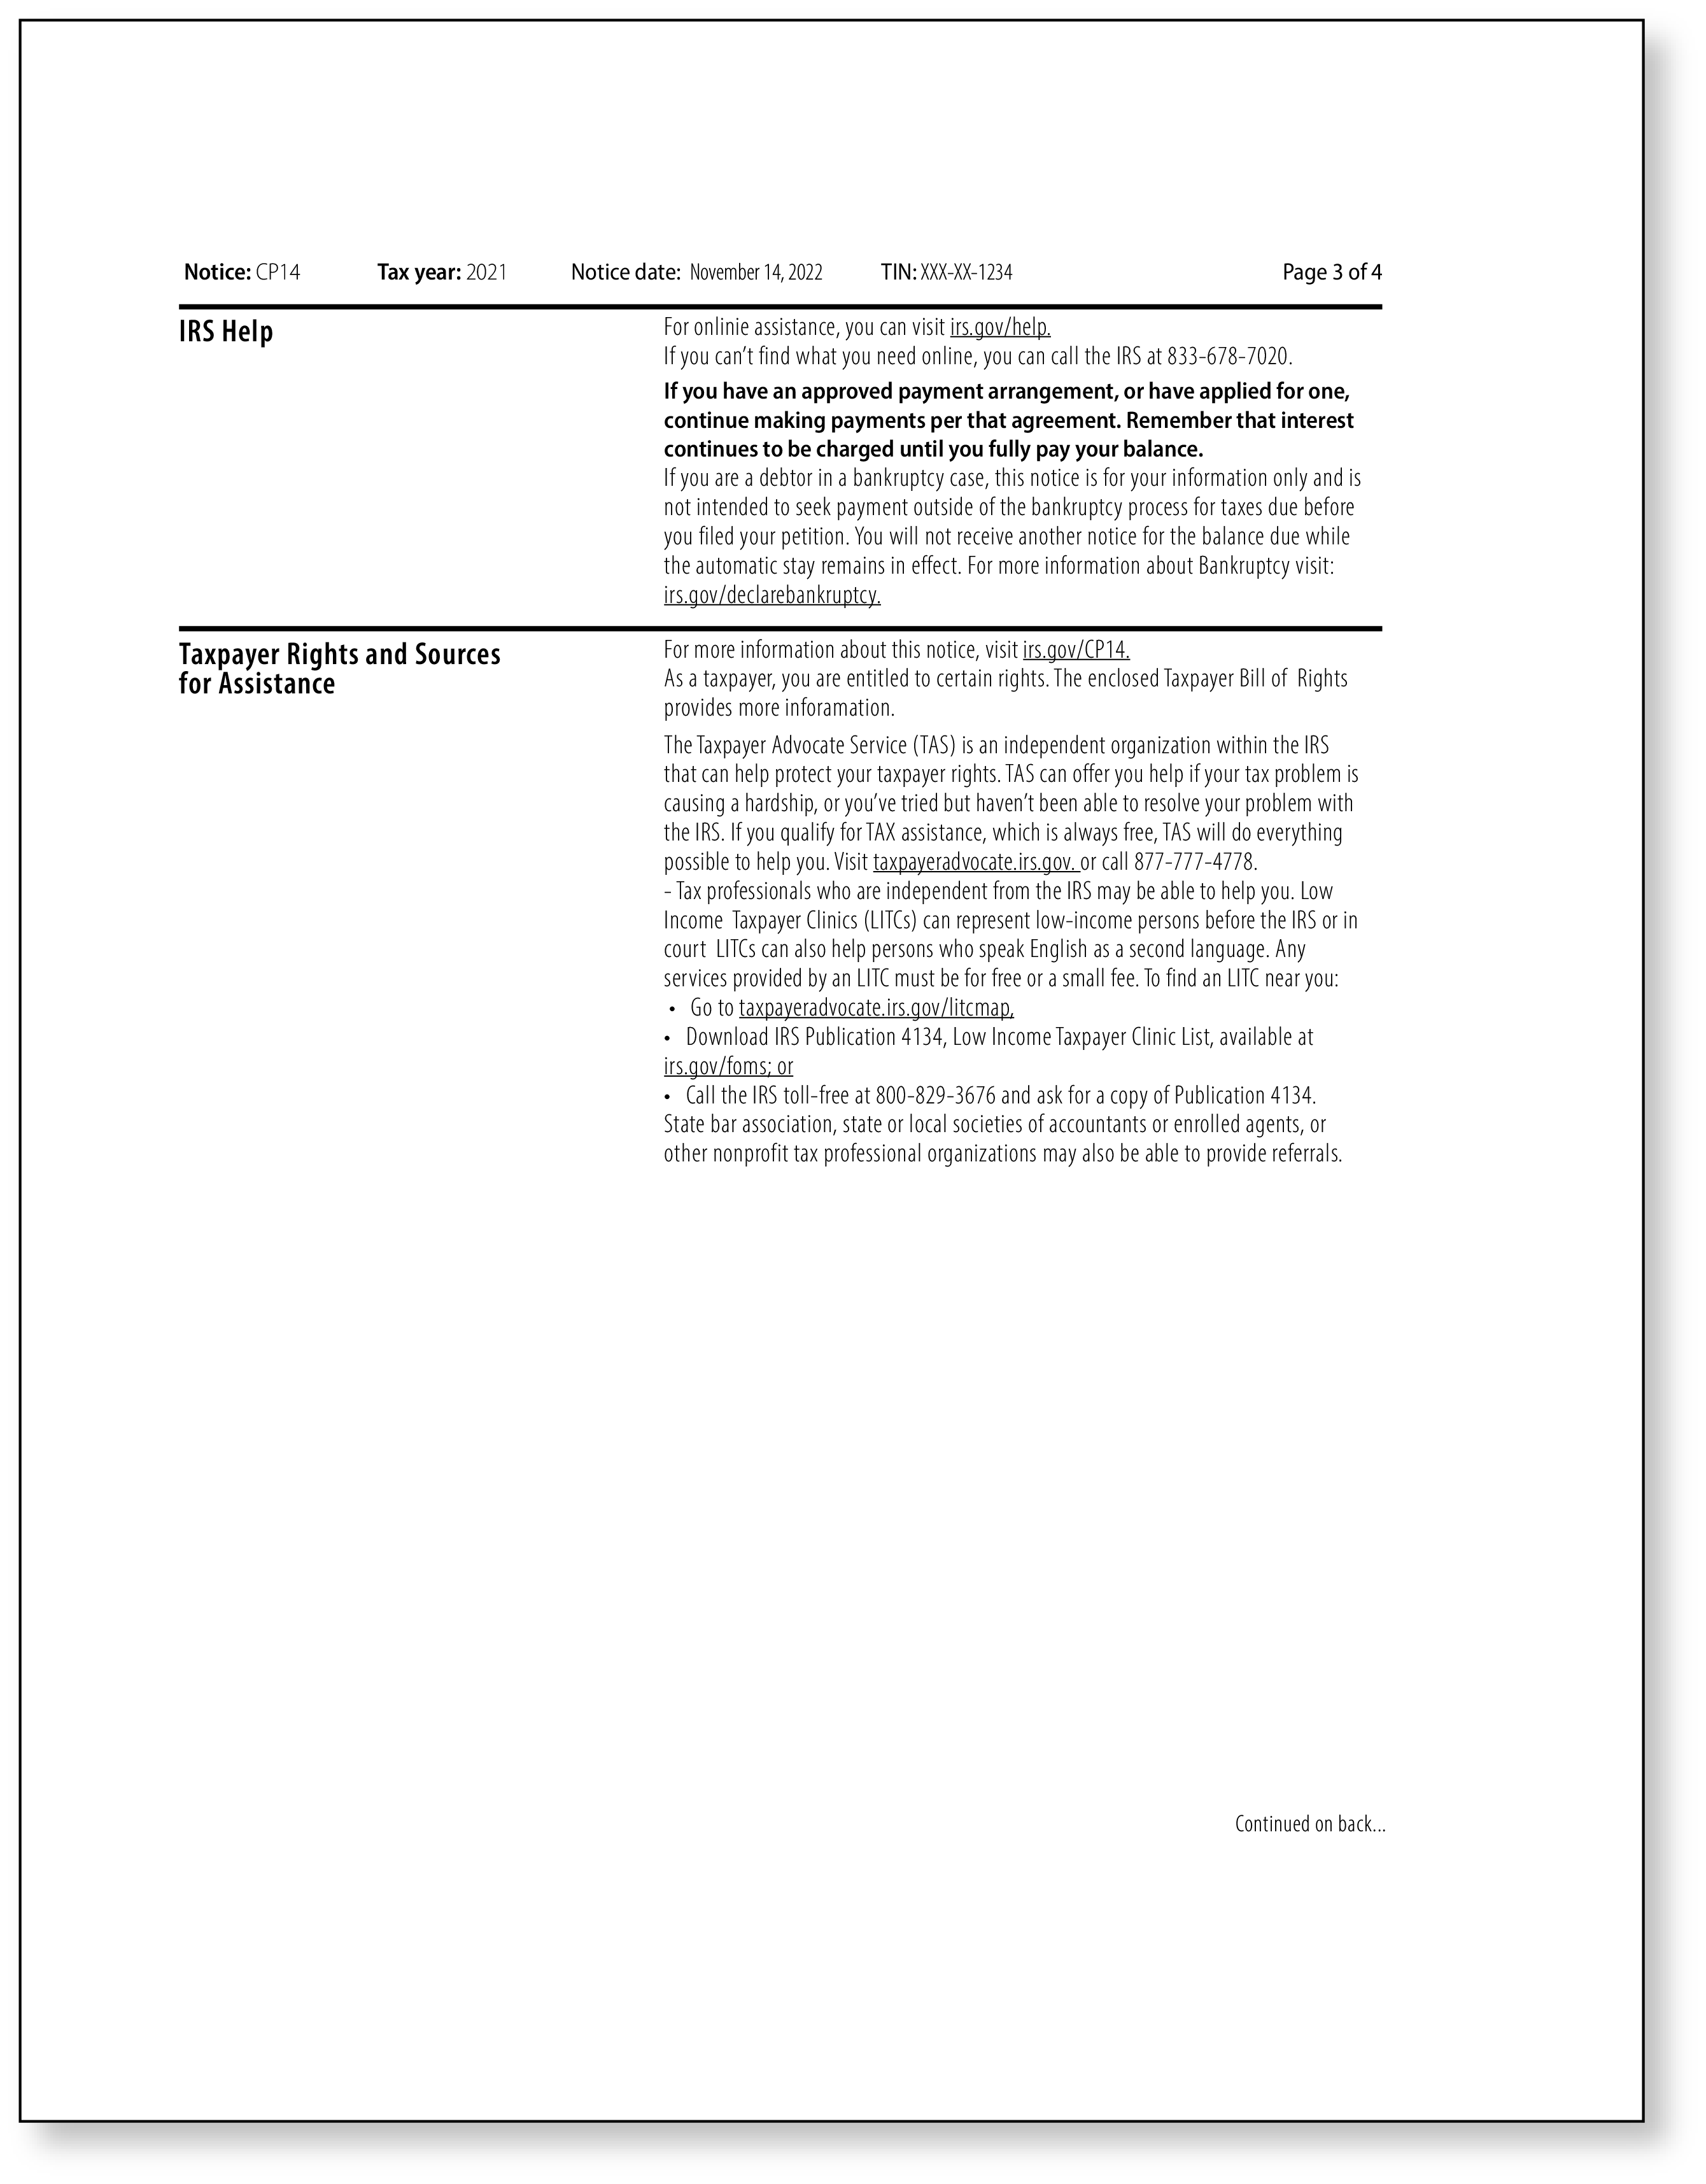 IRS Audit Letter CP14 – Sample 1